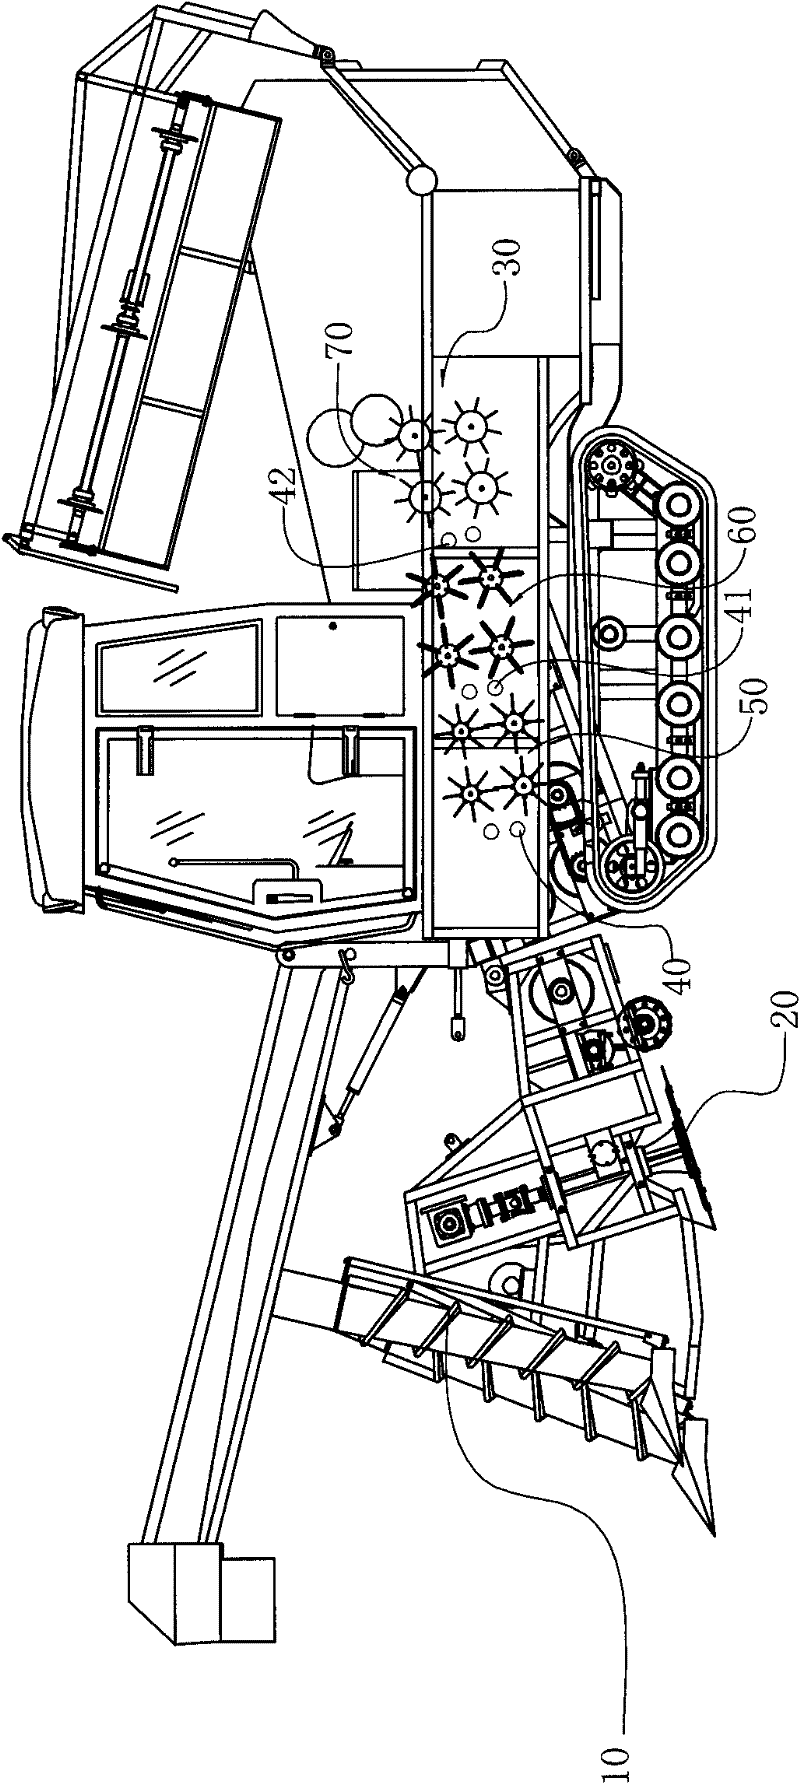 Sugarcane combine harvester with tail cutting device